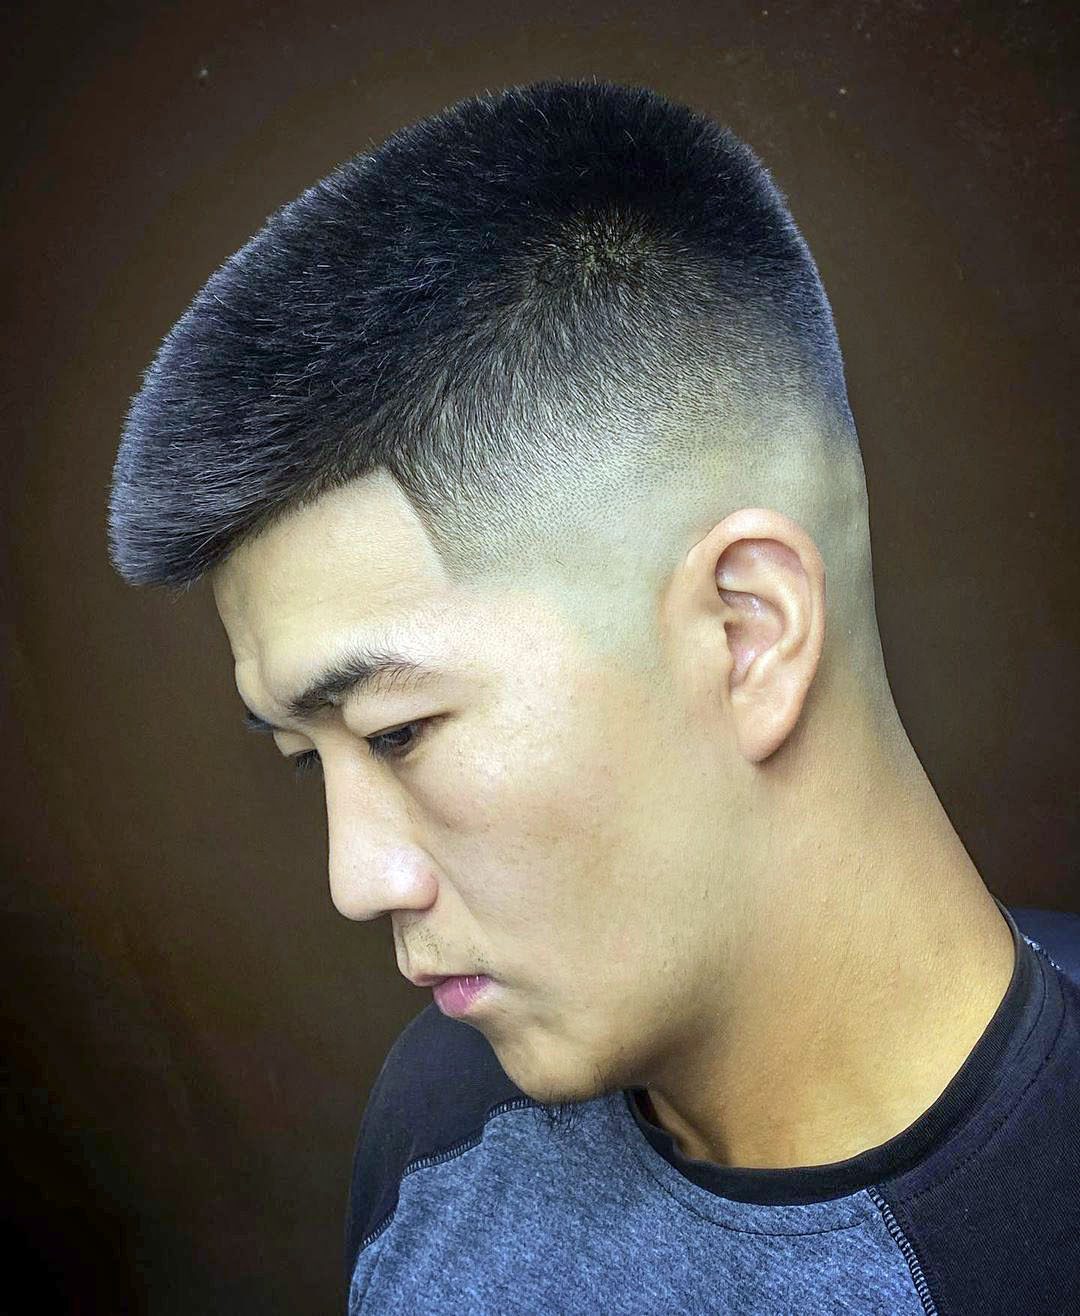 Smashing Mens hairstyles - Bestie Chinese buffer look with cool hairstyle  for men 2019 🔥🔥 Most wanted haircut with greyish colour shade with rear  bumper beard style specially for men 2019🔥🔥 #smashingmenshairstyles #